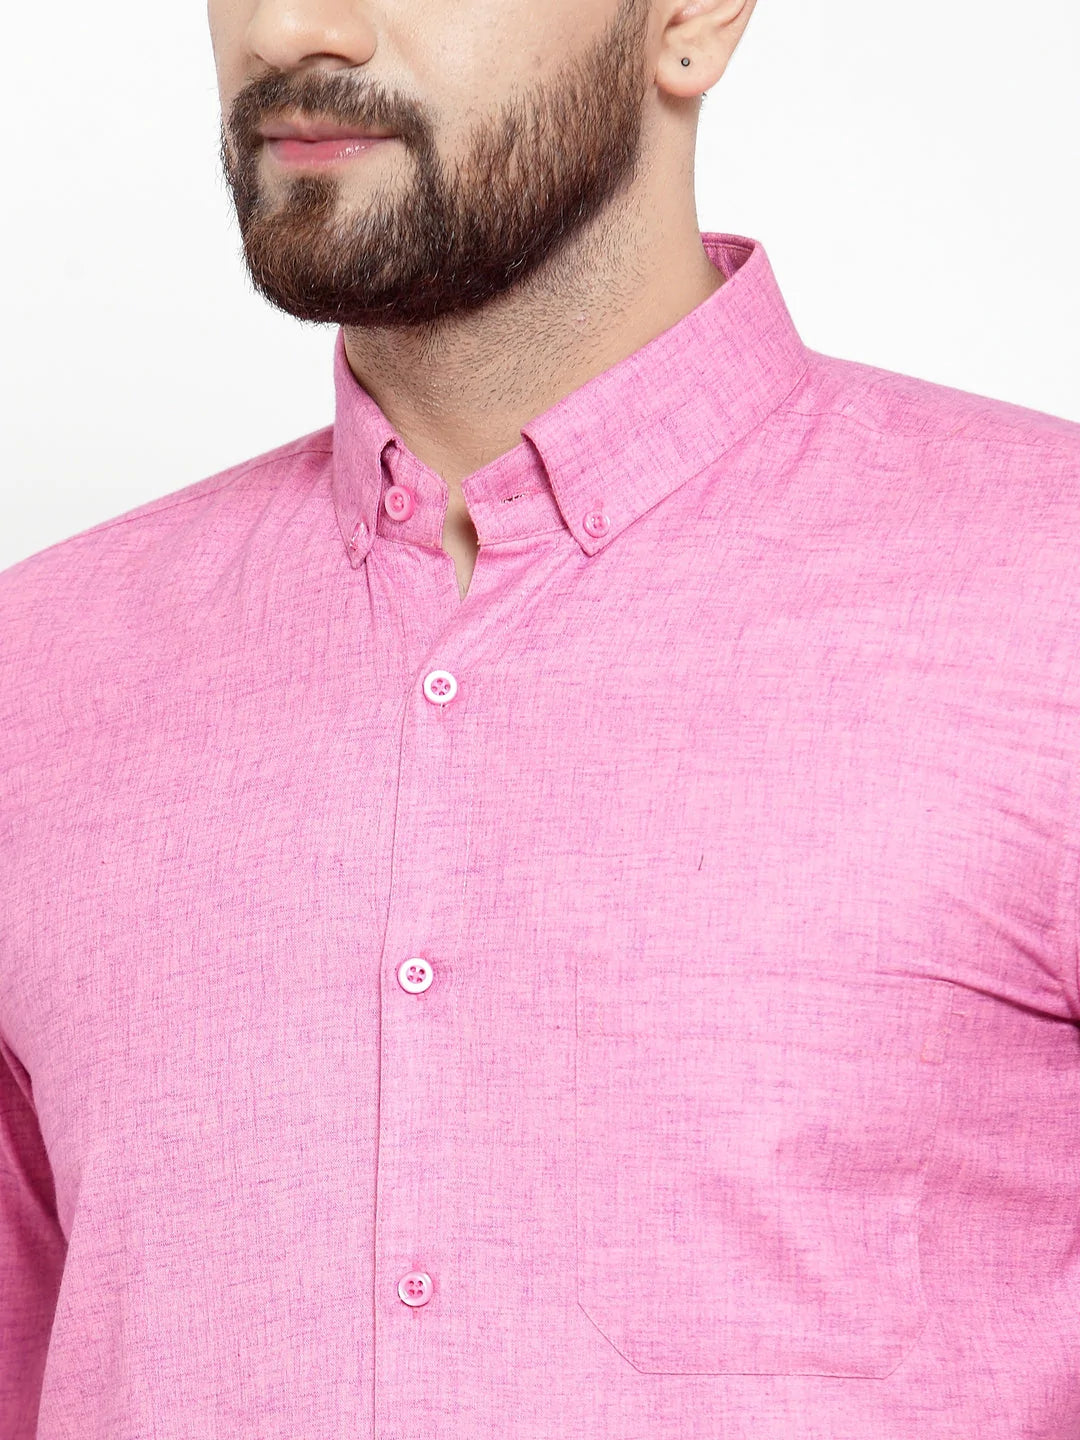 Jainish Pink Men's Cotton Solid Button Down Formal Shirts ( SF 753Pink )